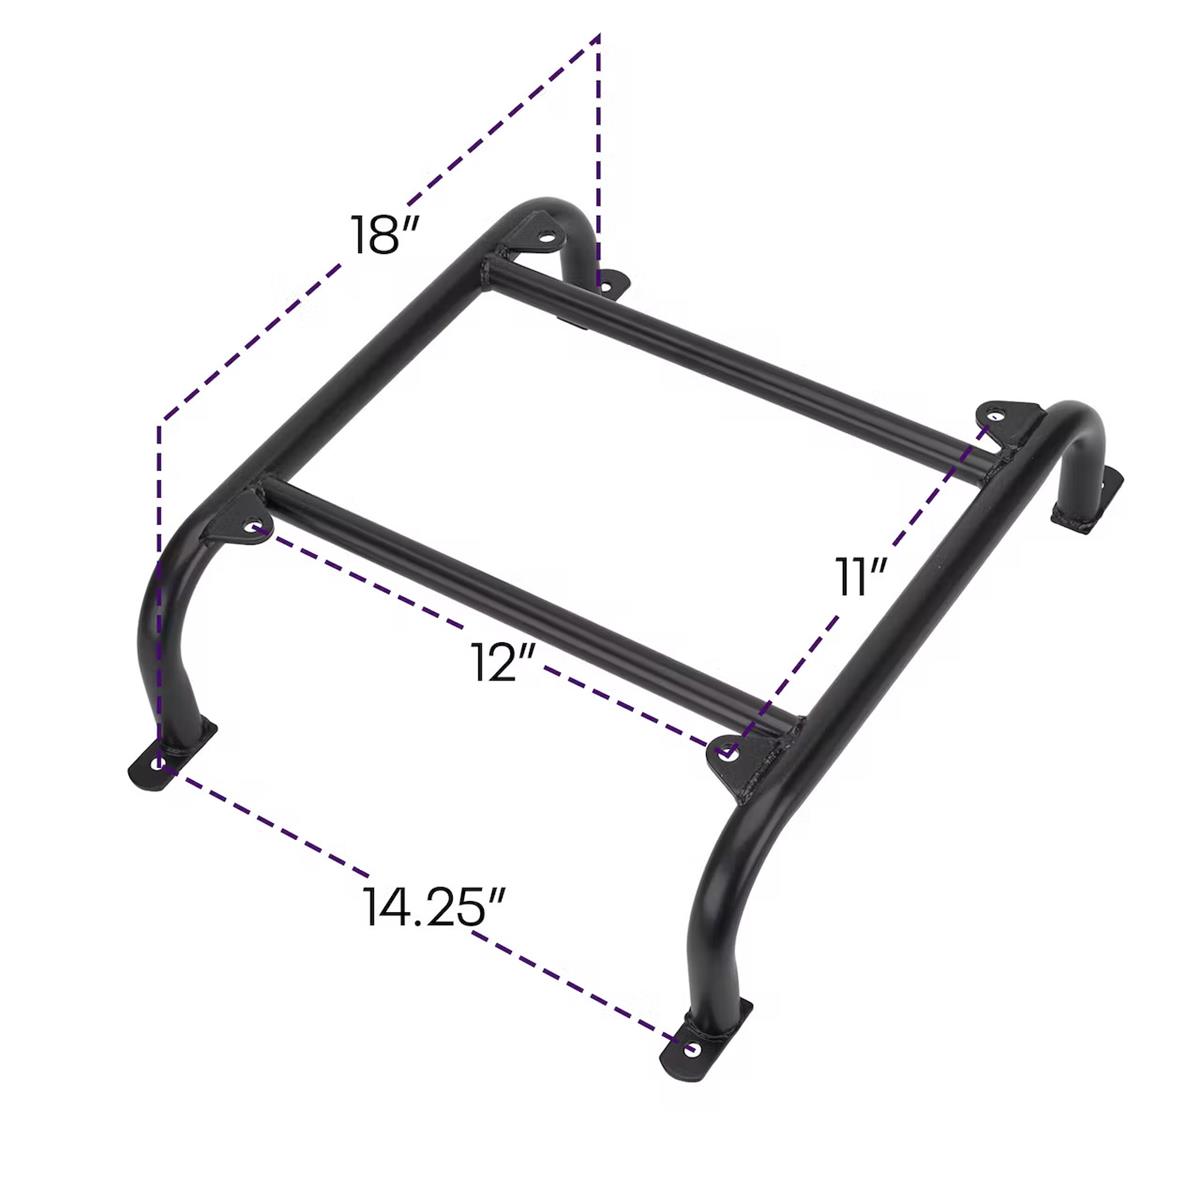 COM-5753 | COM-5753 Universal Seat Mounting Frame with Slider and Mounts Common Application11.jpg